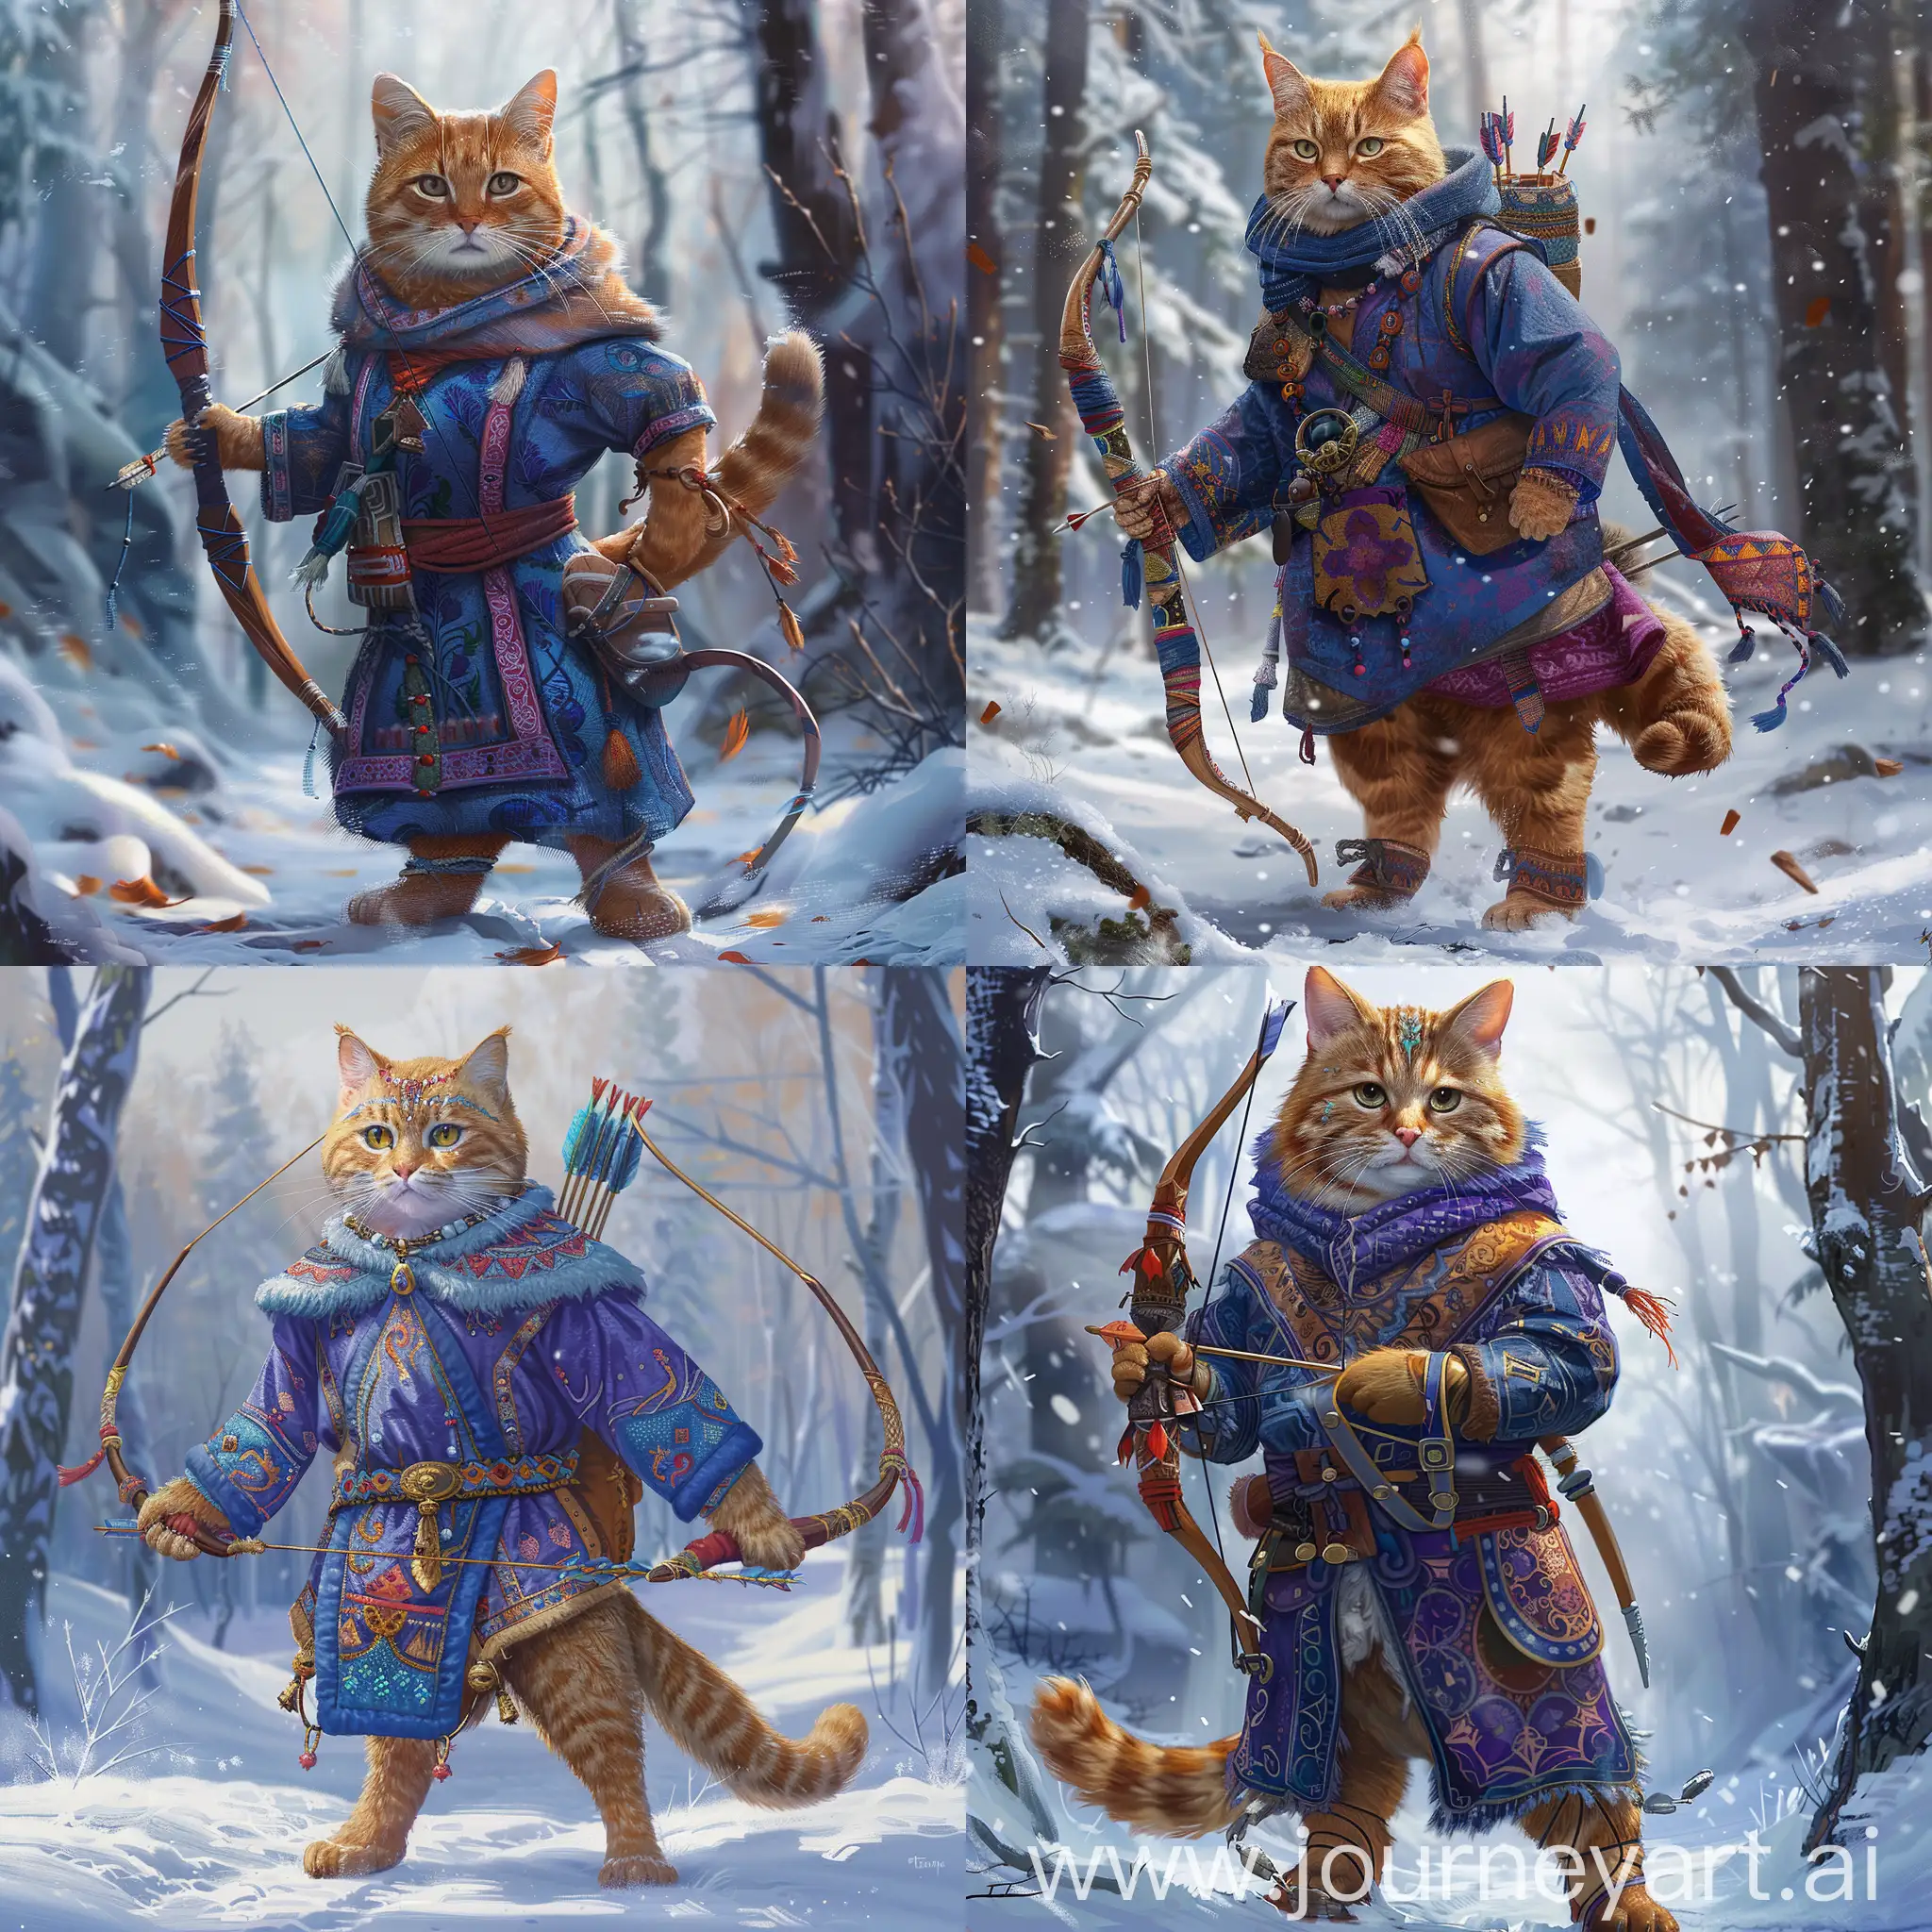 Orange-Tabby-Cat-in-Traditional-Blue-and-Purple-Clothing-with-Bow-and-Arrow-in-Snowy-Forest-Scene